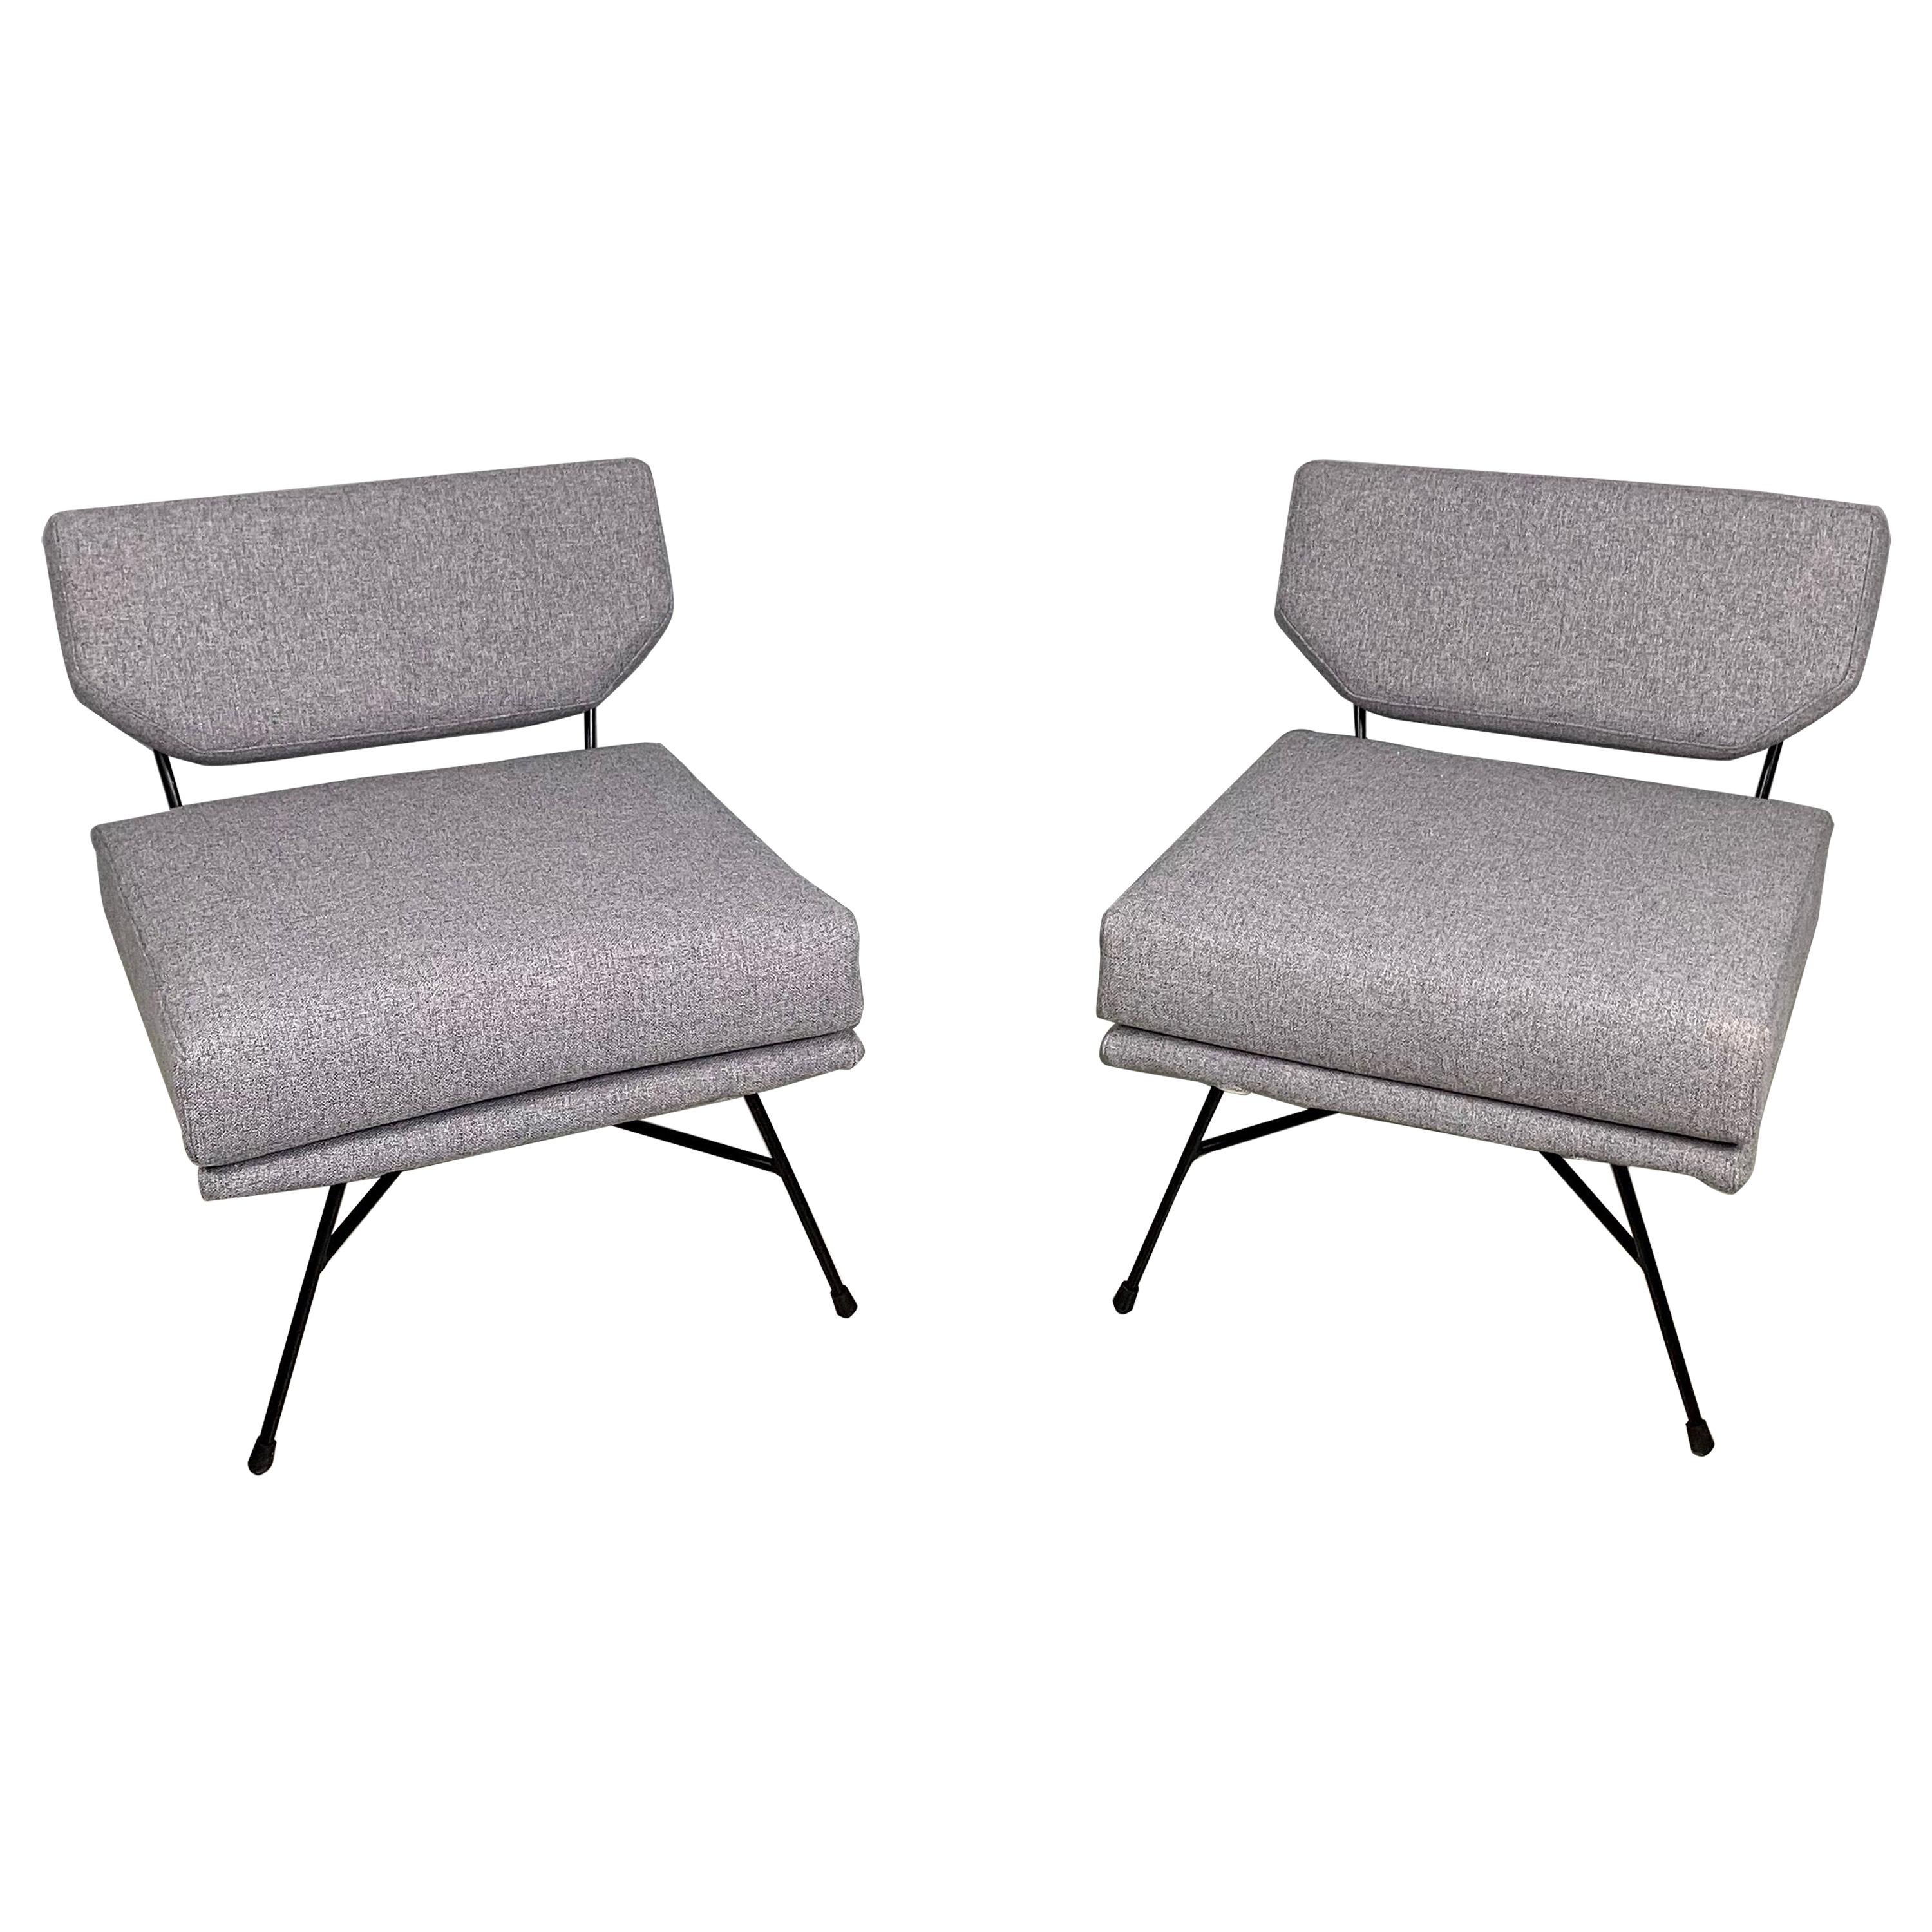 Pair of 'Elettra' Lounge Chairs by BBPR, Arflex, Italy 1953, Compasso D'Oro 1954